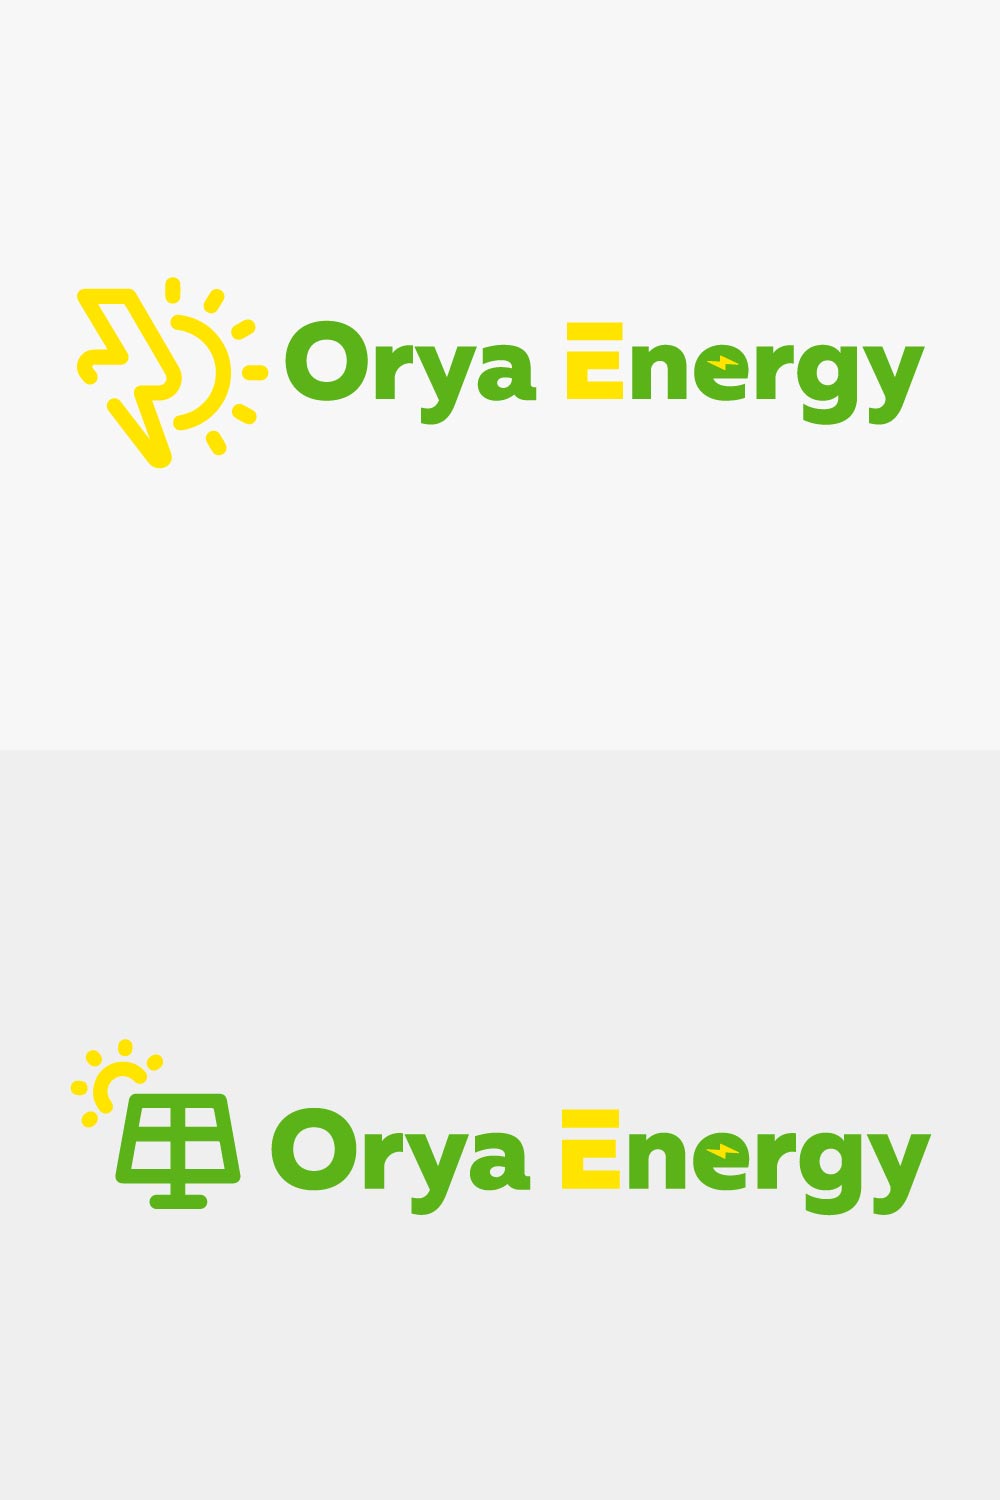 Solar energy logo designs in vector format, featuring sun power elements pinterest preview image.